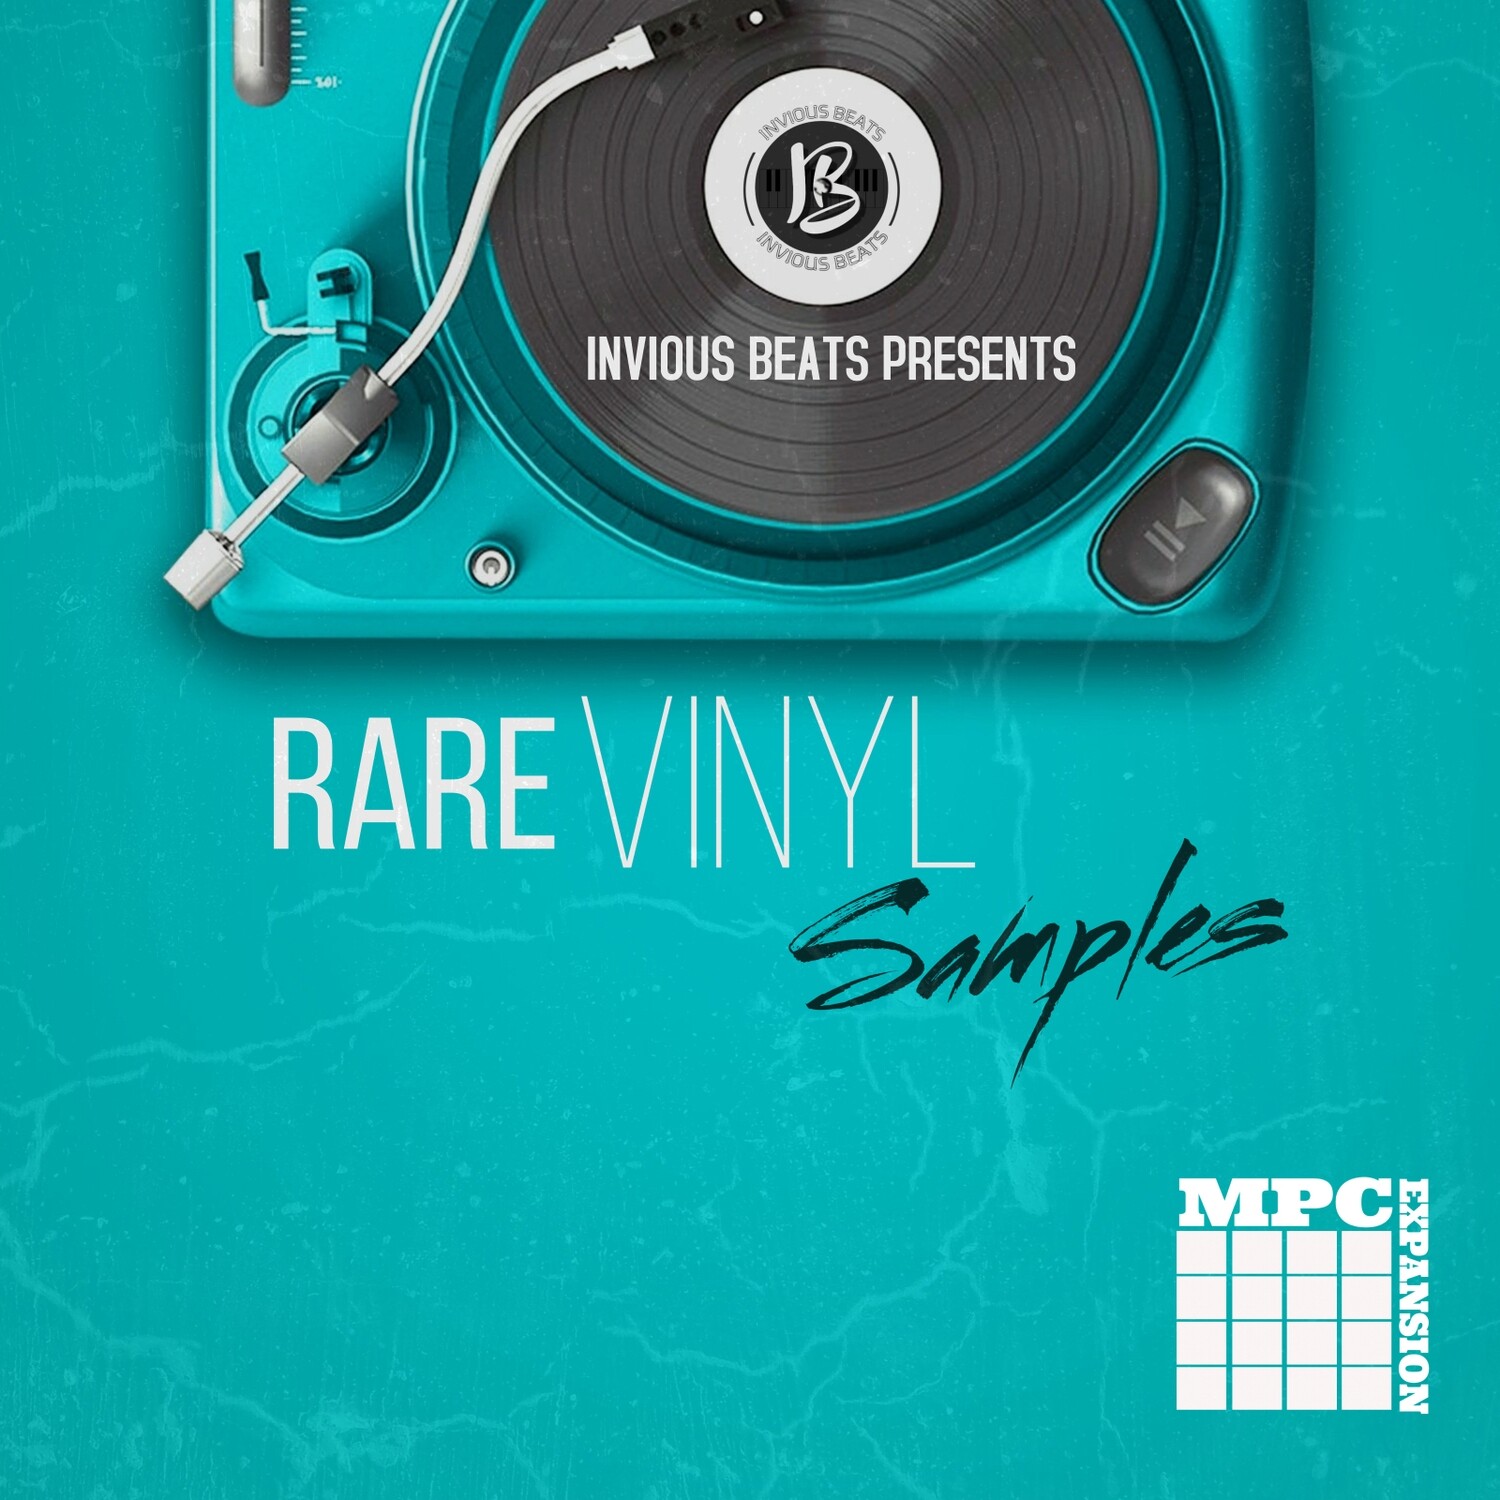 MPC EXPANSION 'RARE VINYL' by INVIOUS